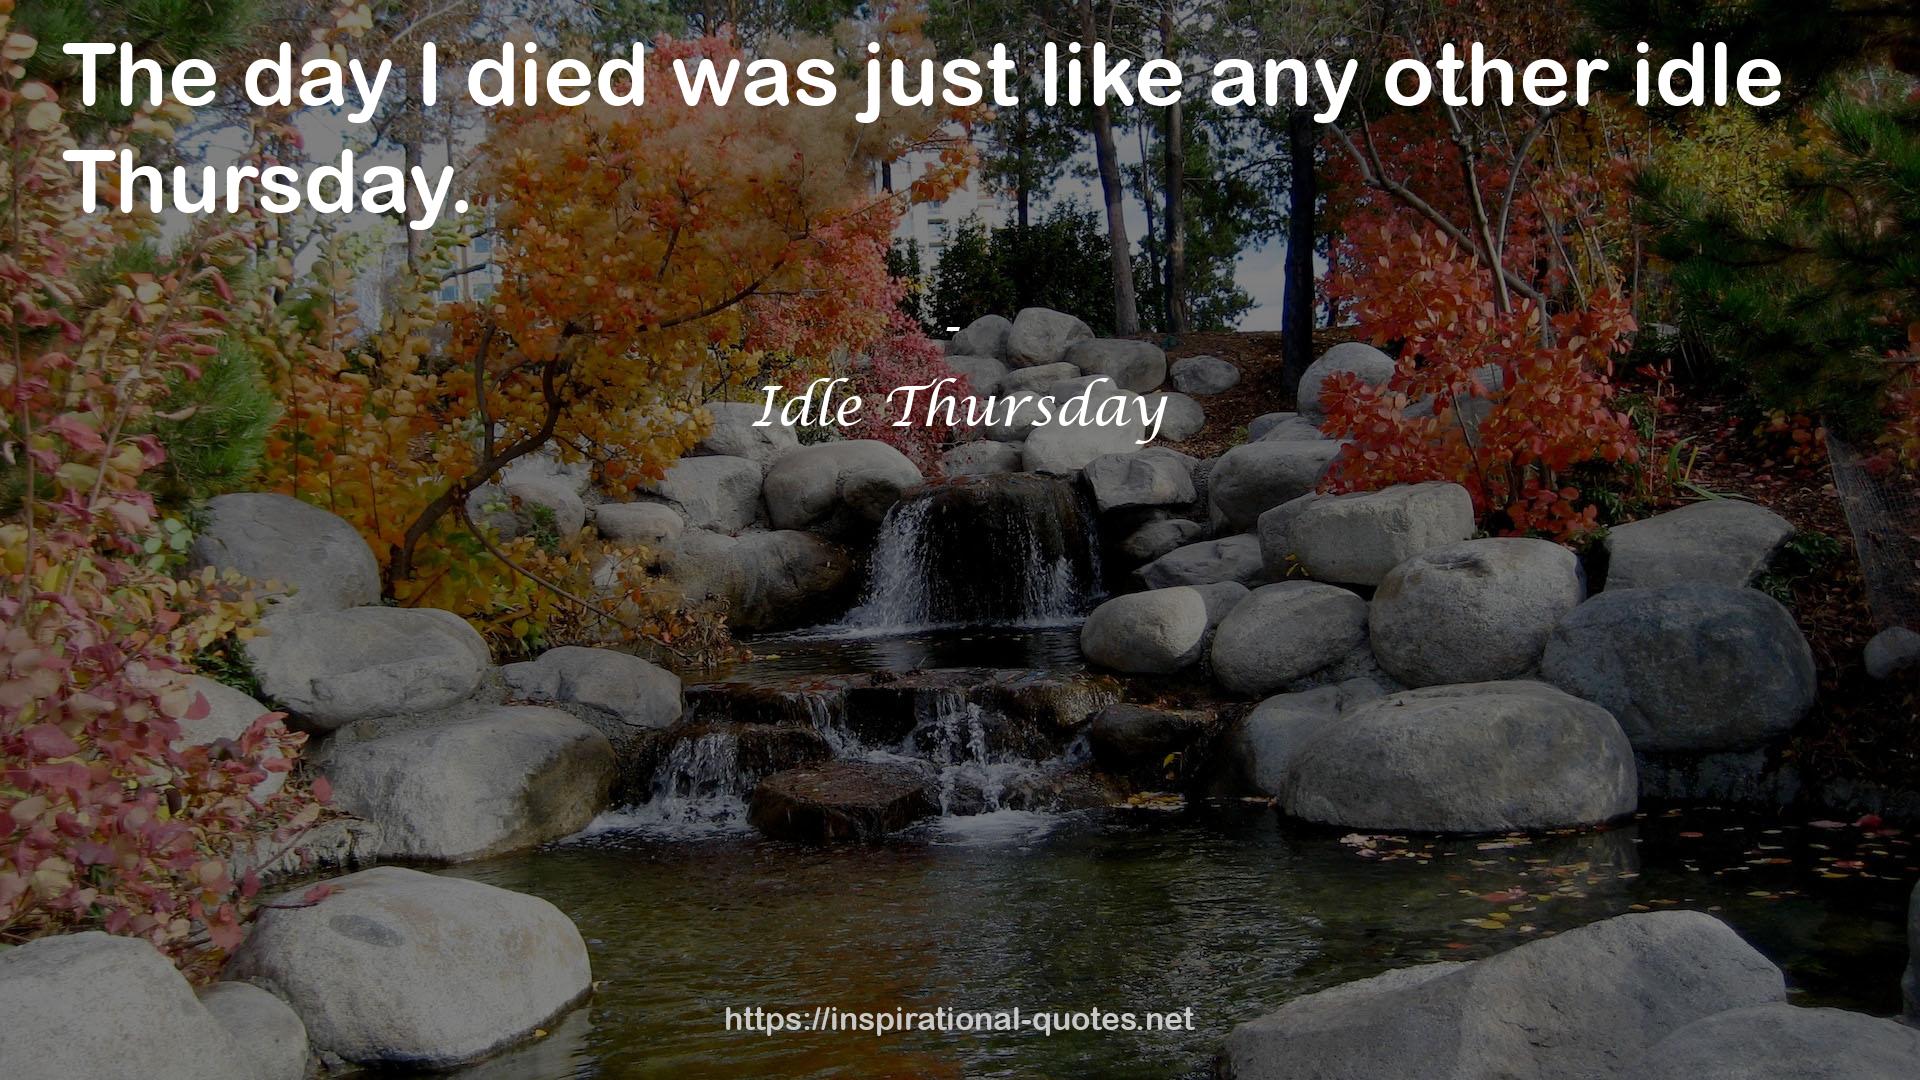 Idle Thursday QUOTES